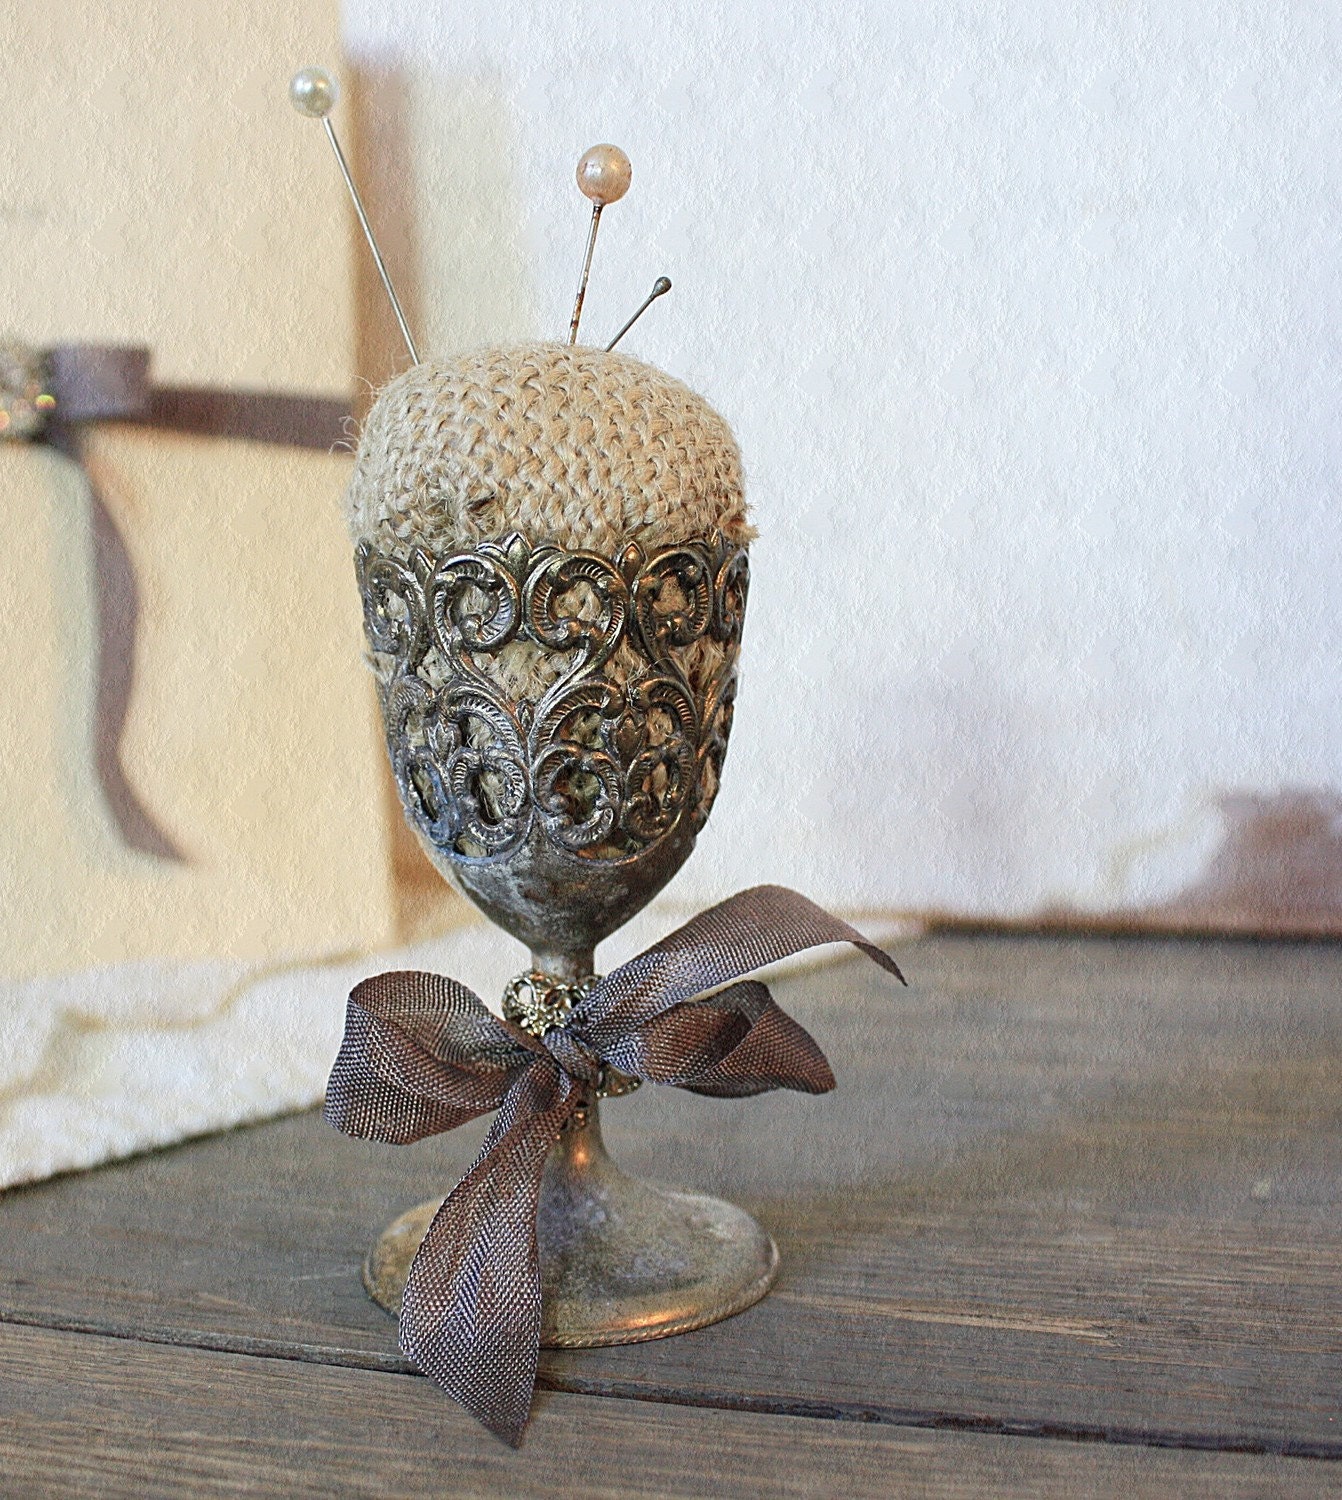 Burlap Pin Cushion in Ornate Vintage Silver Plate Cup